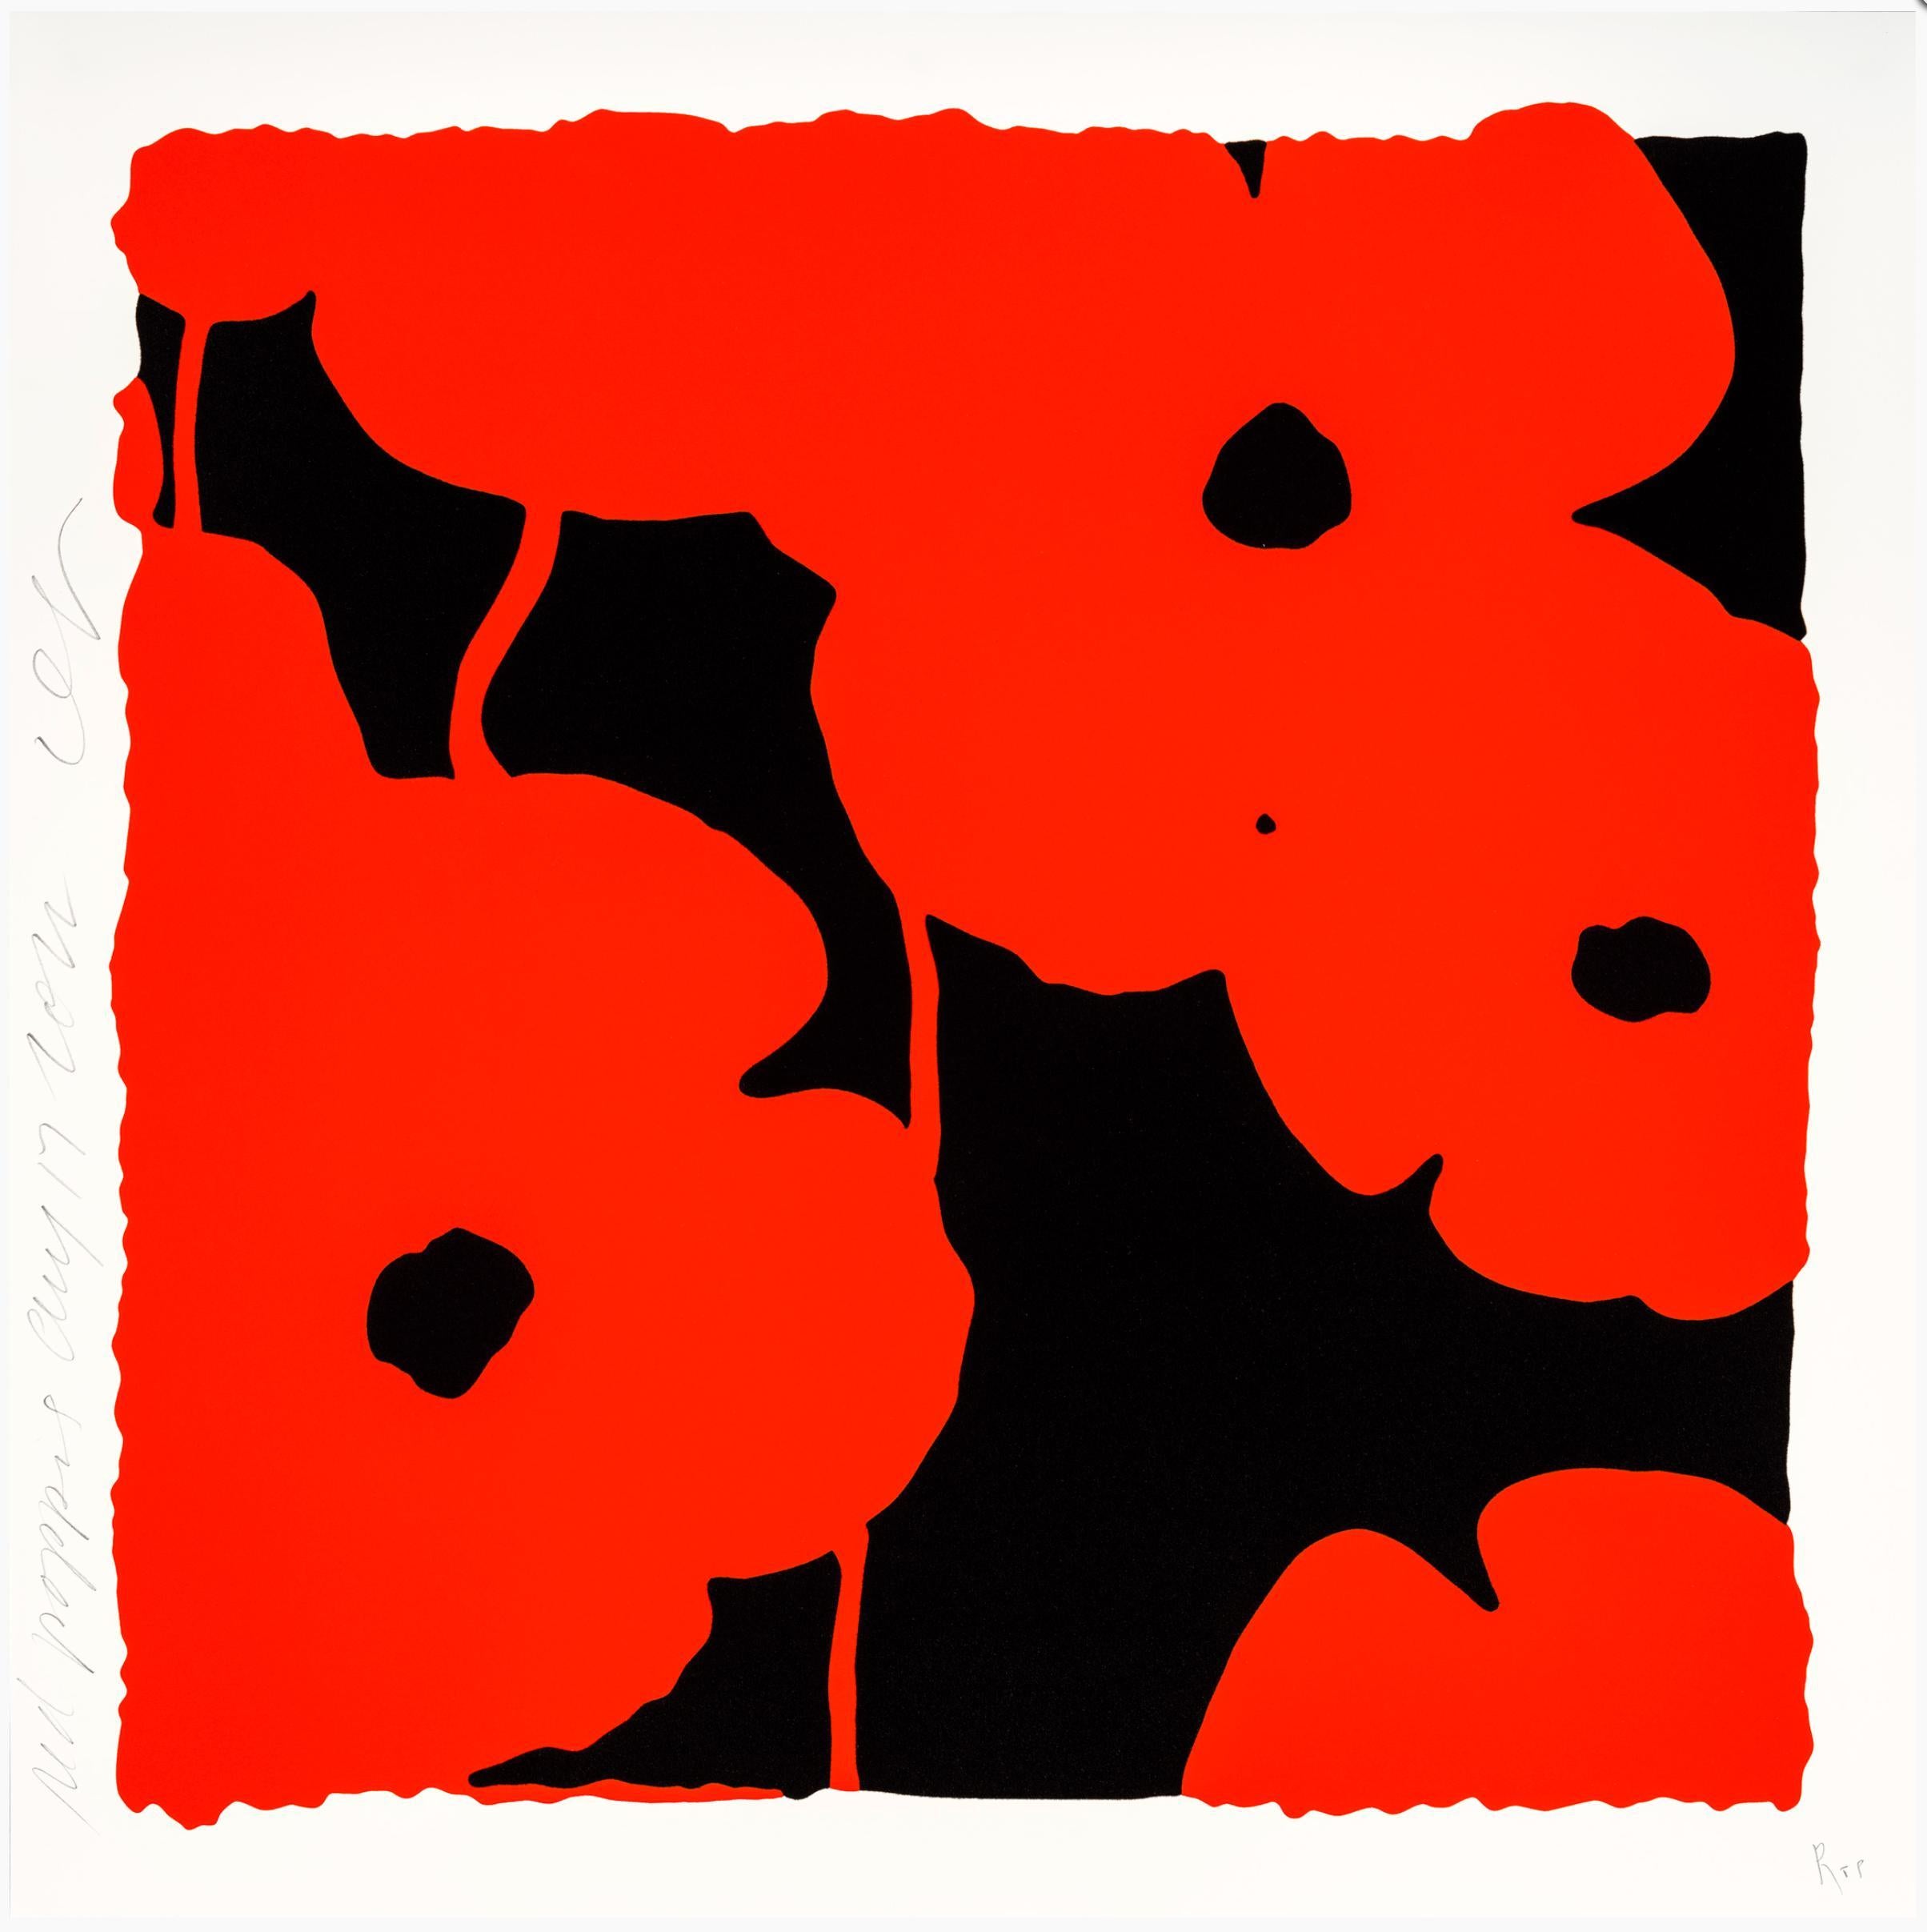 Donald Sultan Still-Life Print - Red Poppies, Aug 17, 2022